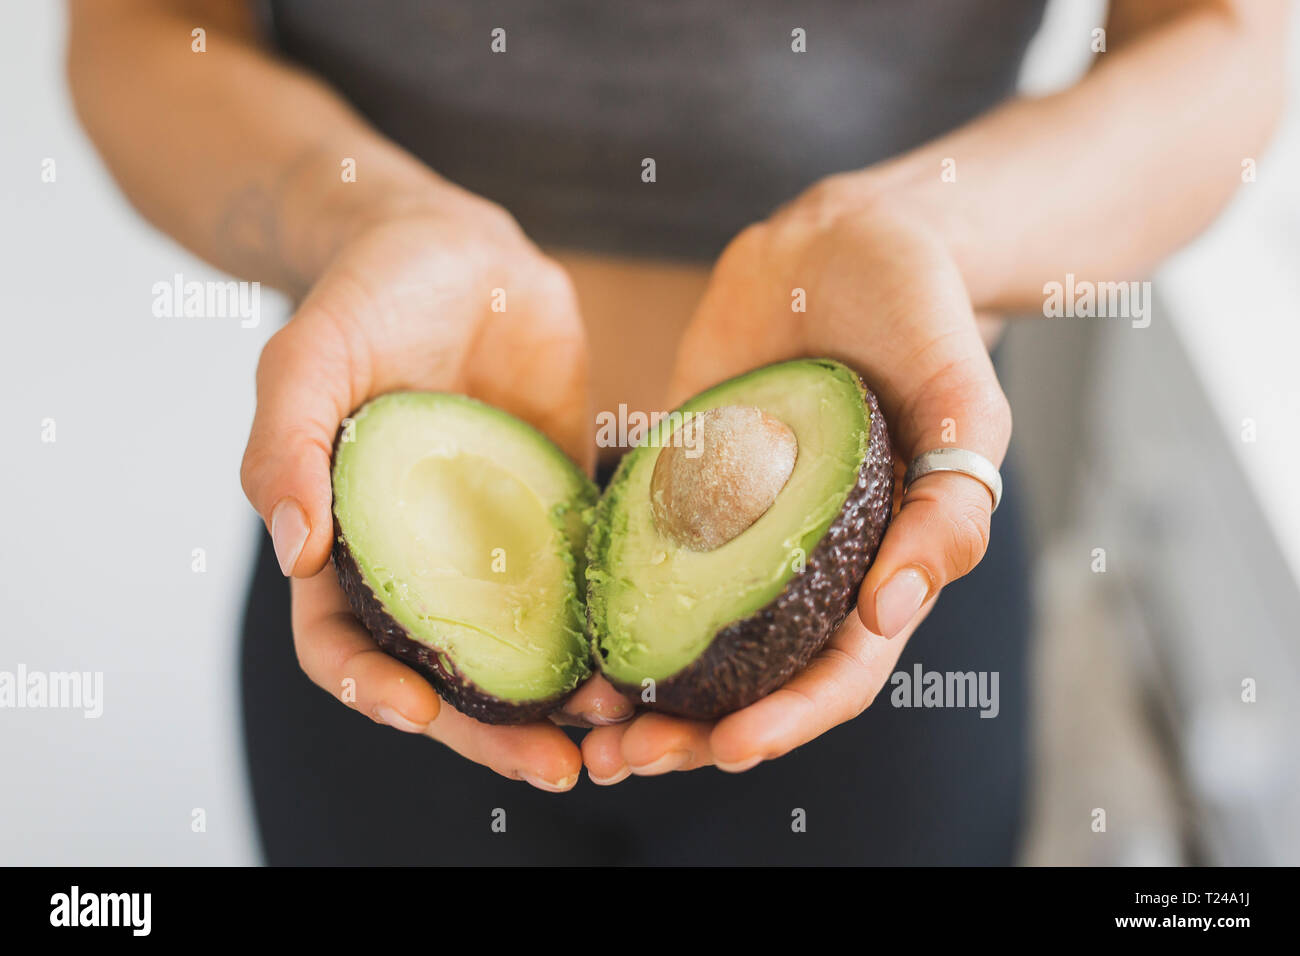 Hands of woman holding halved avocado Stock Photo